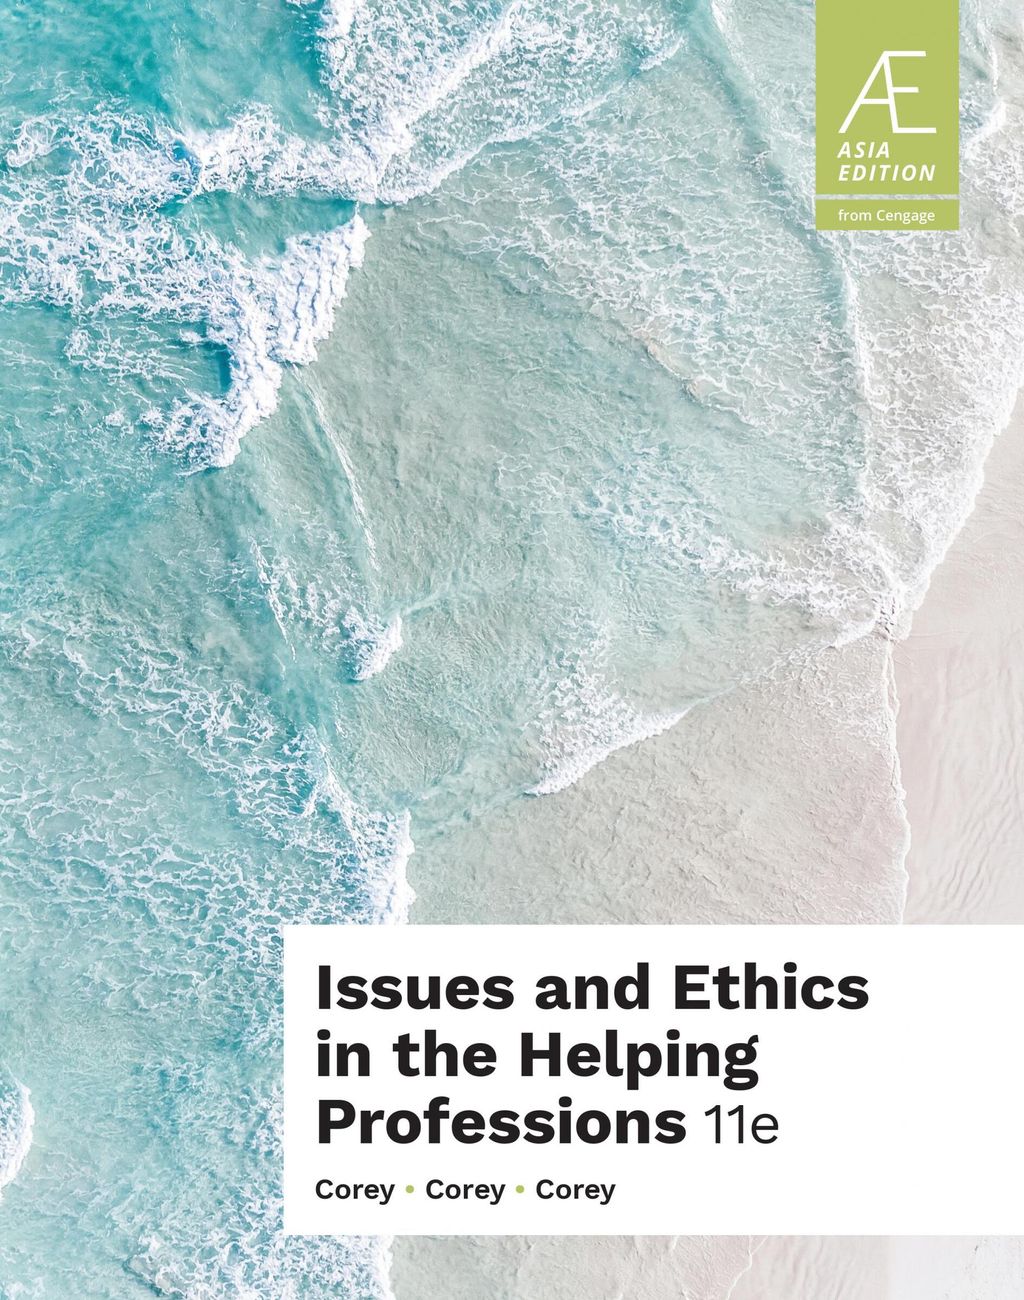 9789815160666 Issue and Ethics in the Helping Professions Corey 11th AE